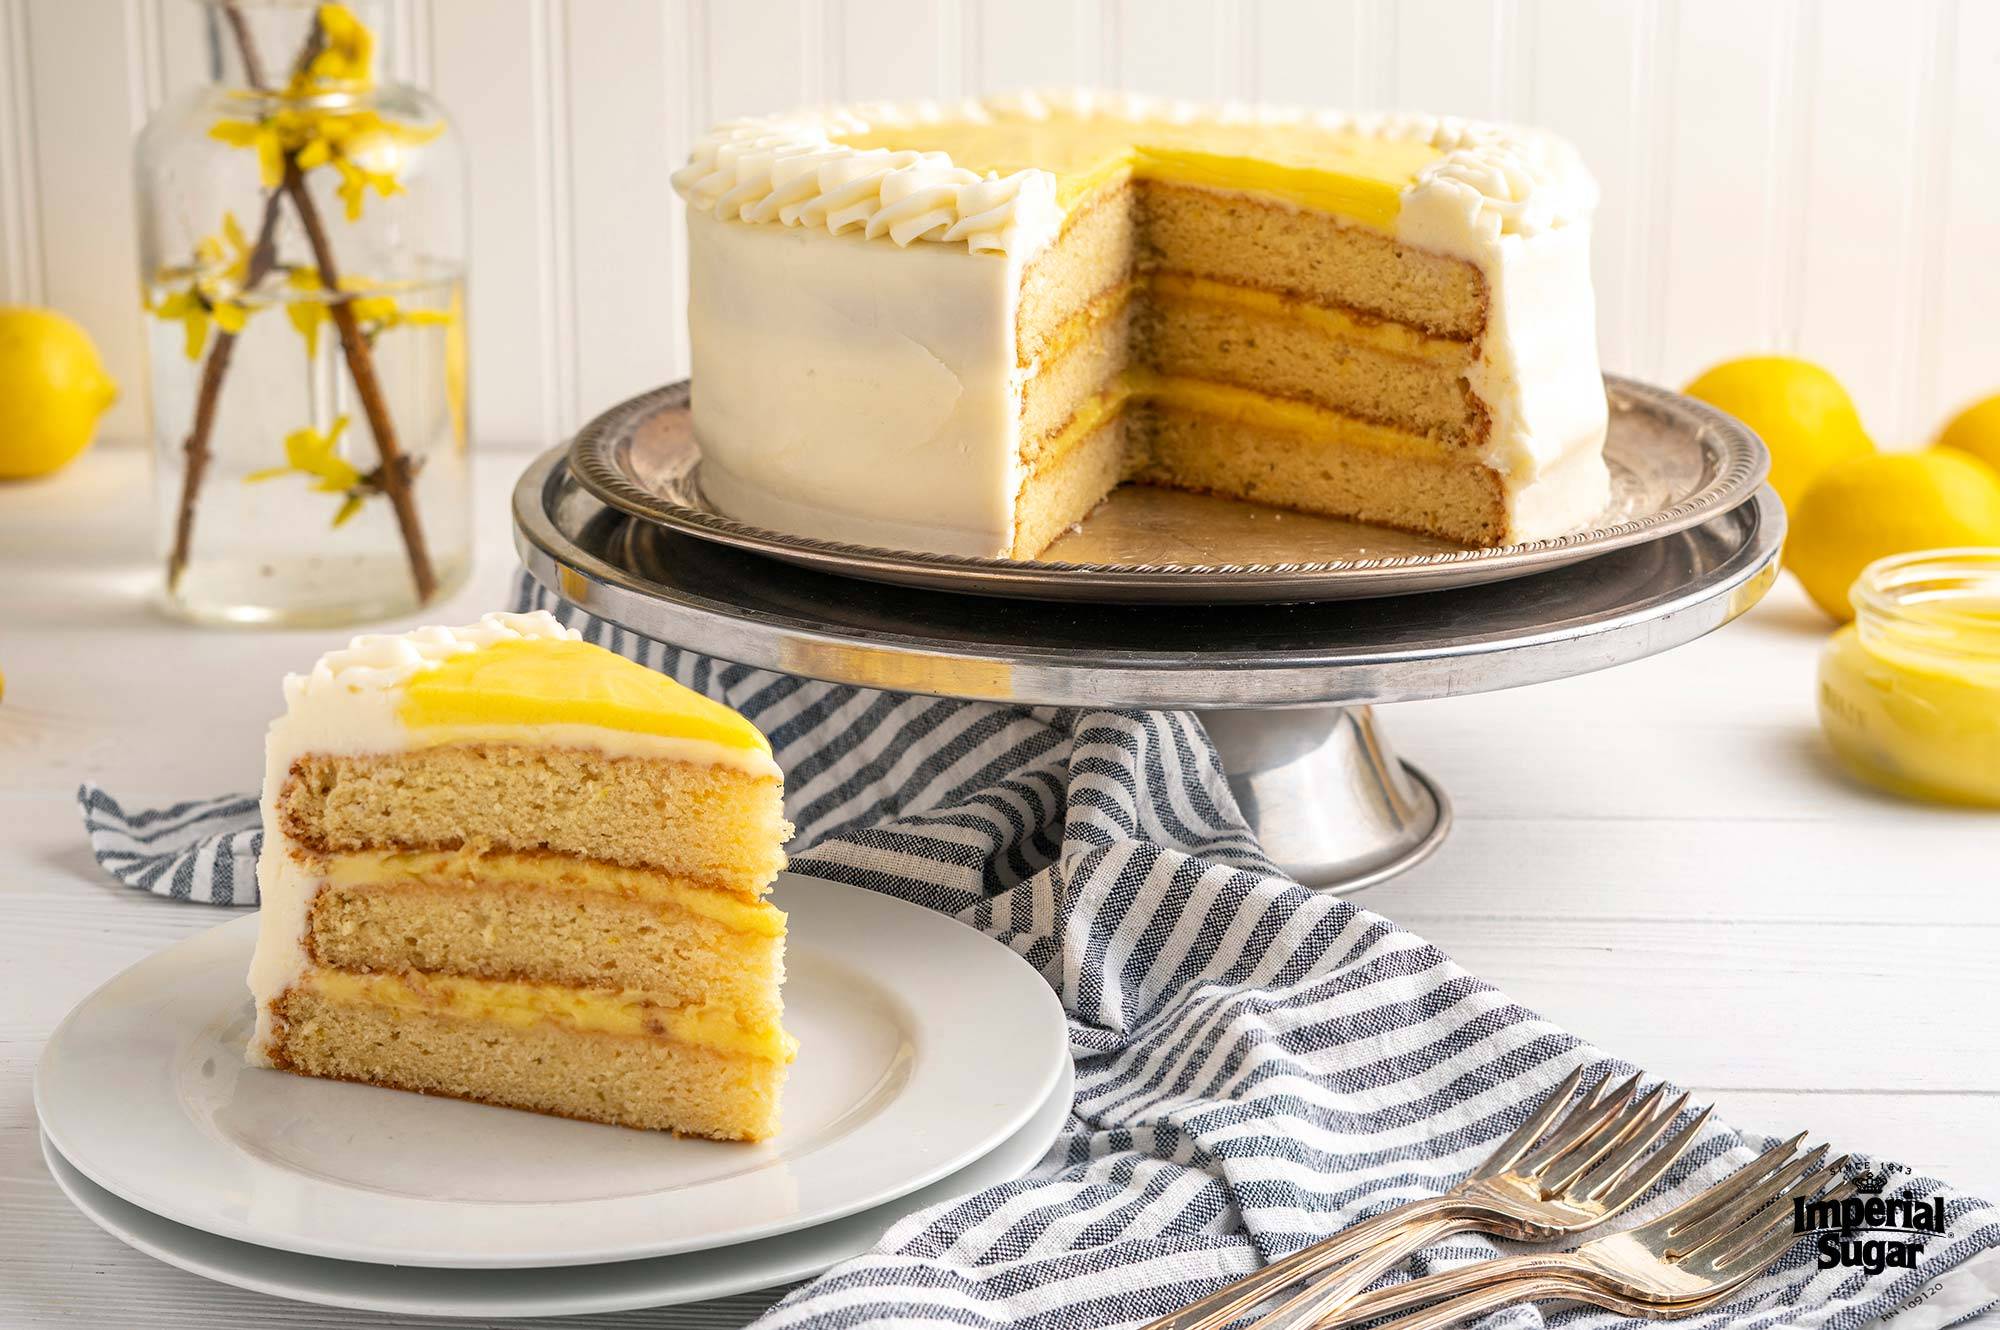 Lemon Curd Layer Cake with Cream Cheese Frosting | Imperial Sugar